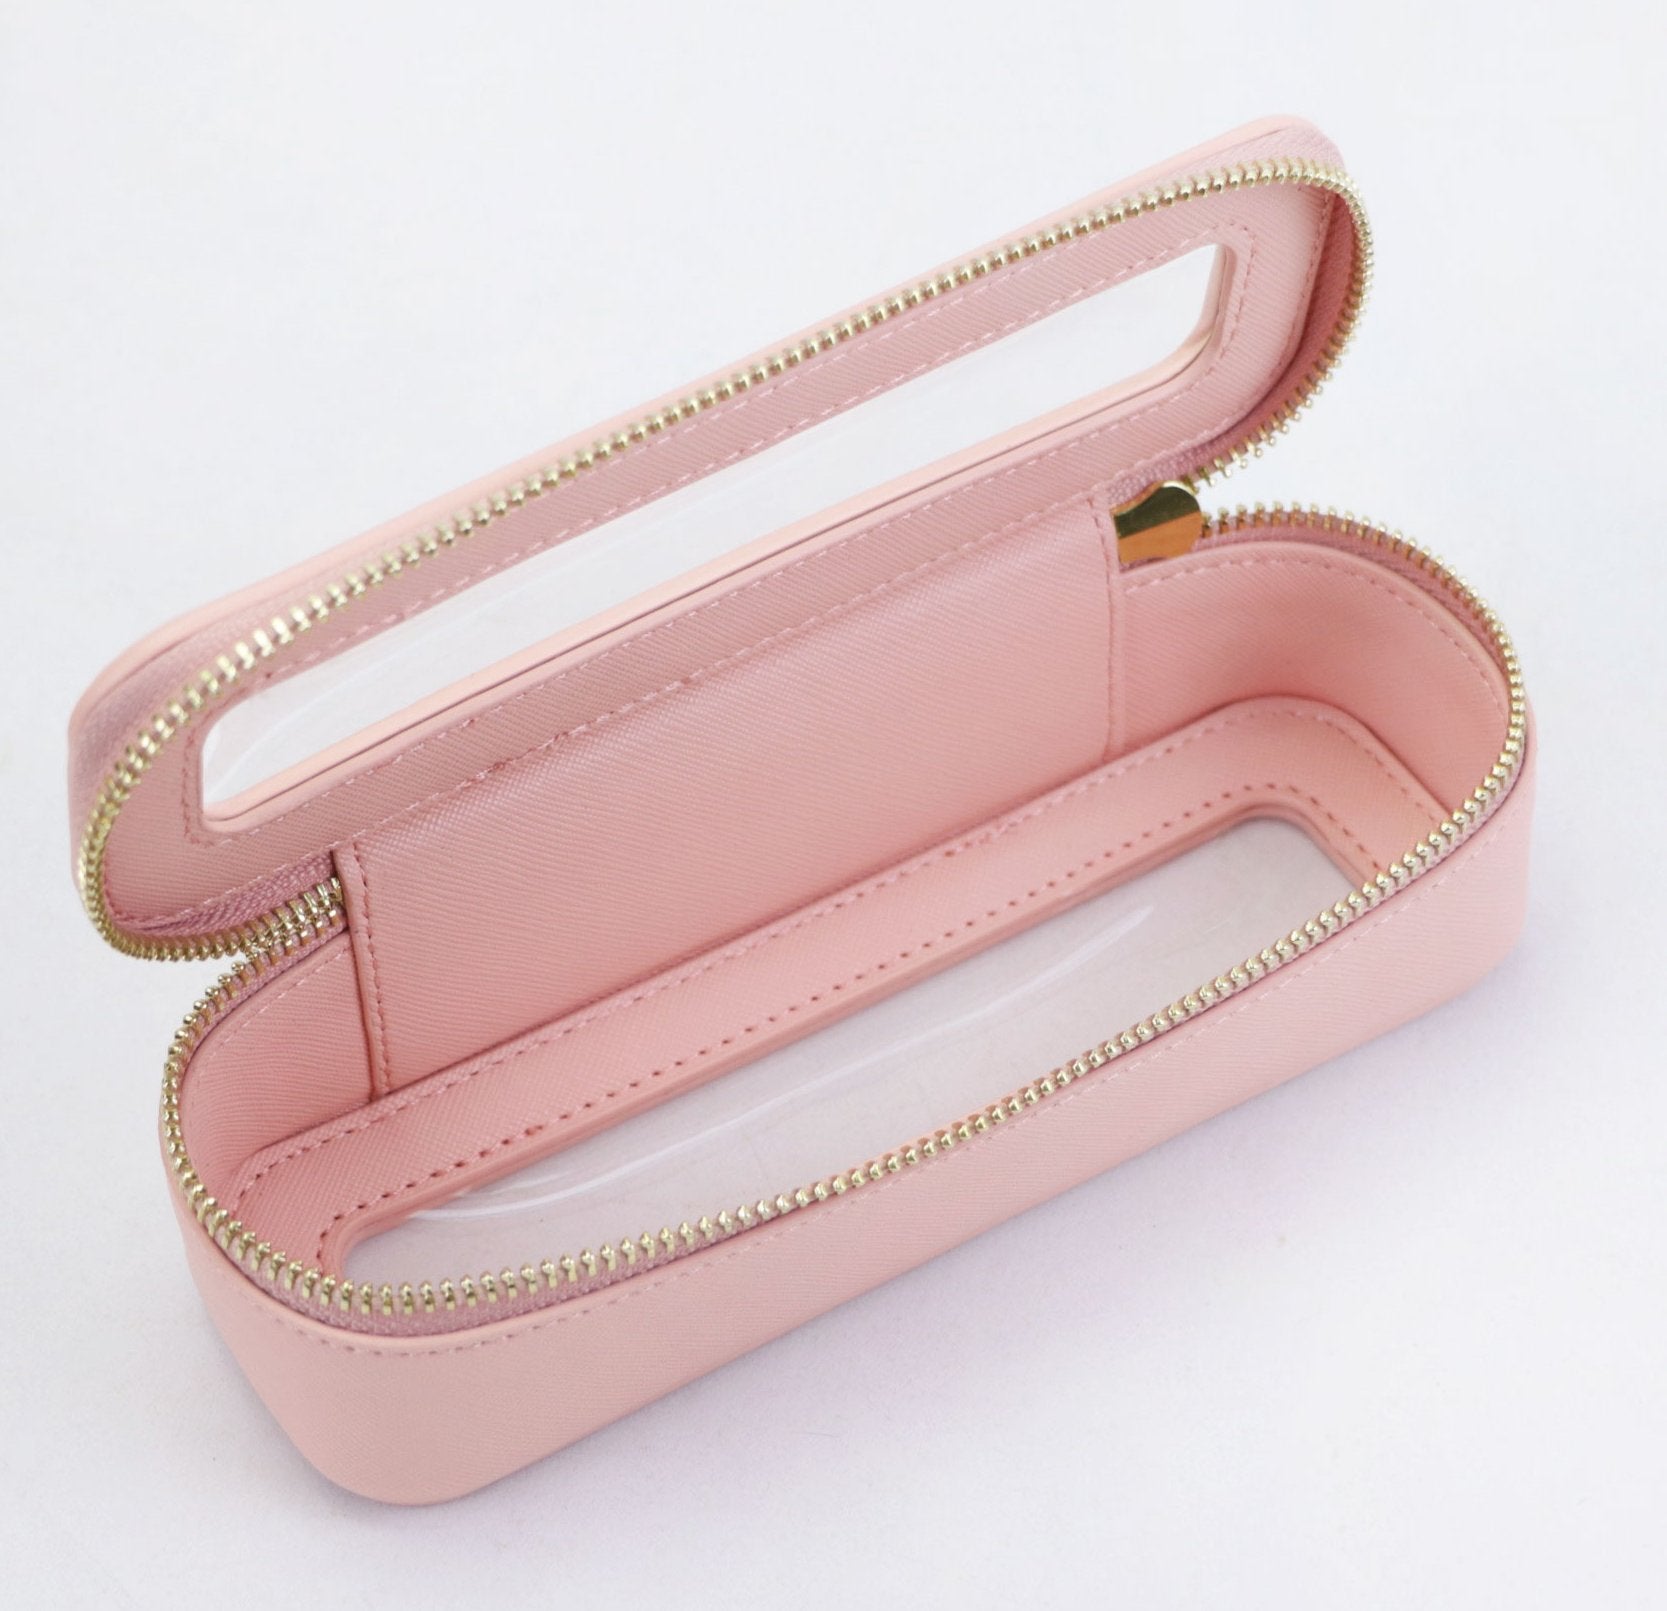 Keep Your Beauty Essentials Safe: Explore Our Makeup Bag with Resilient Zipper! This PU Leather Beauty Organizer is Water-Resistant, Easy to Clean, and Features Transparent PVC Windows for Quick Access. Protect Your Makeup Brushes and Products